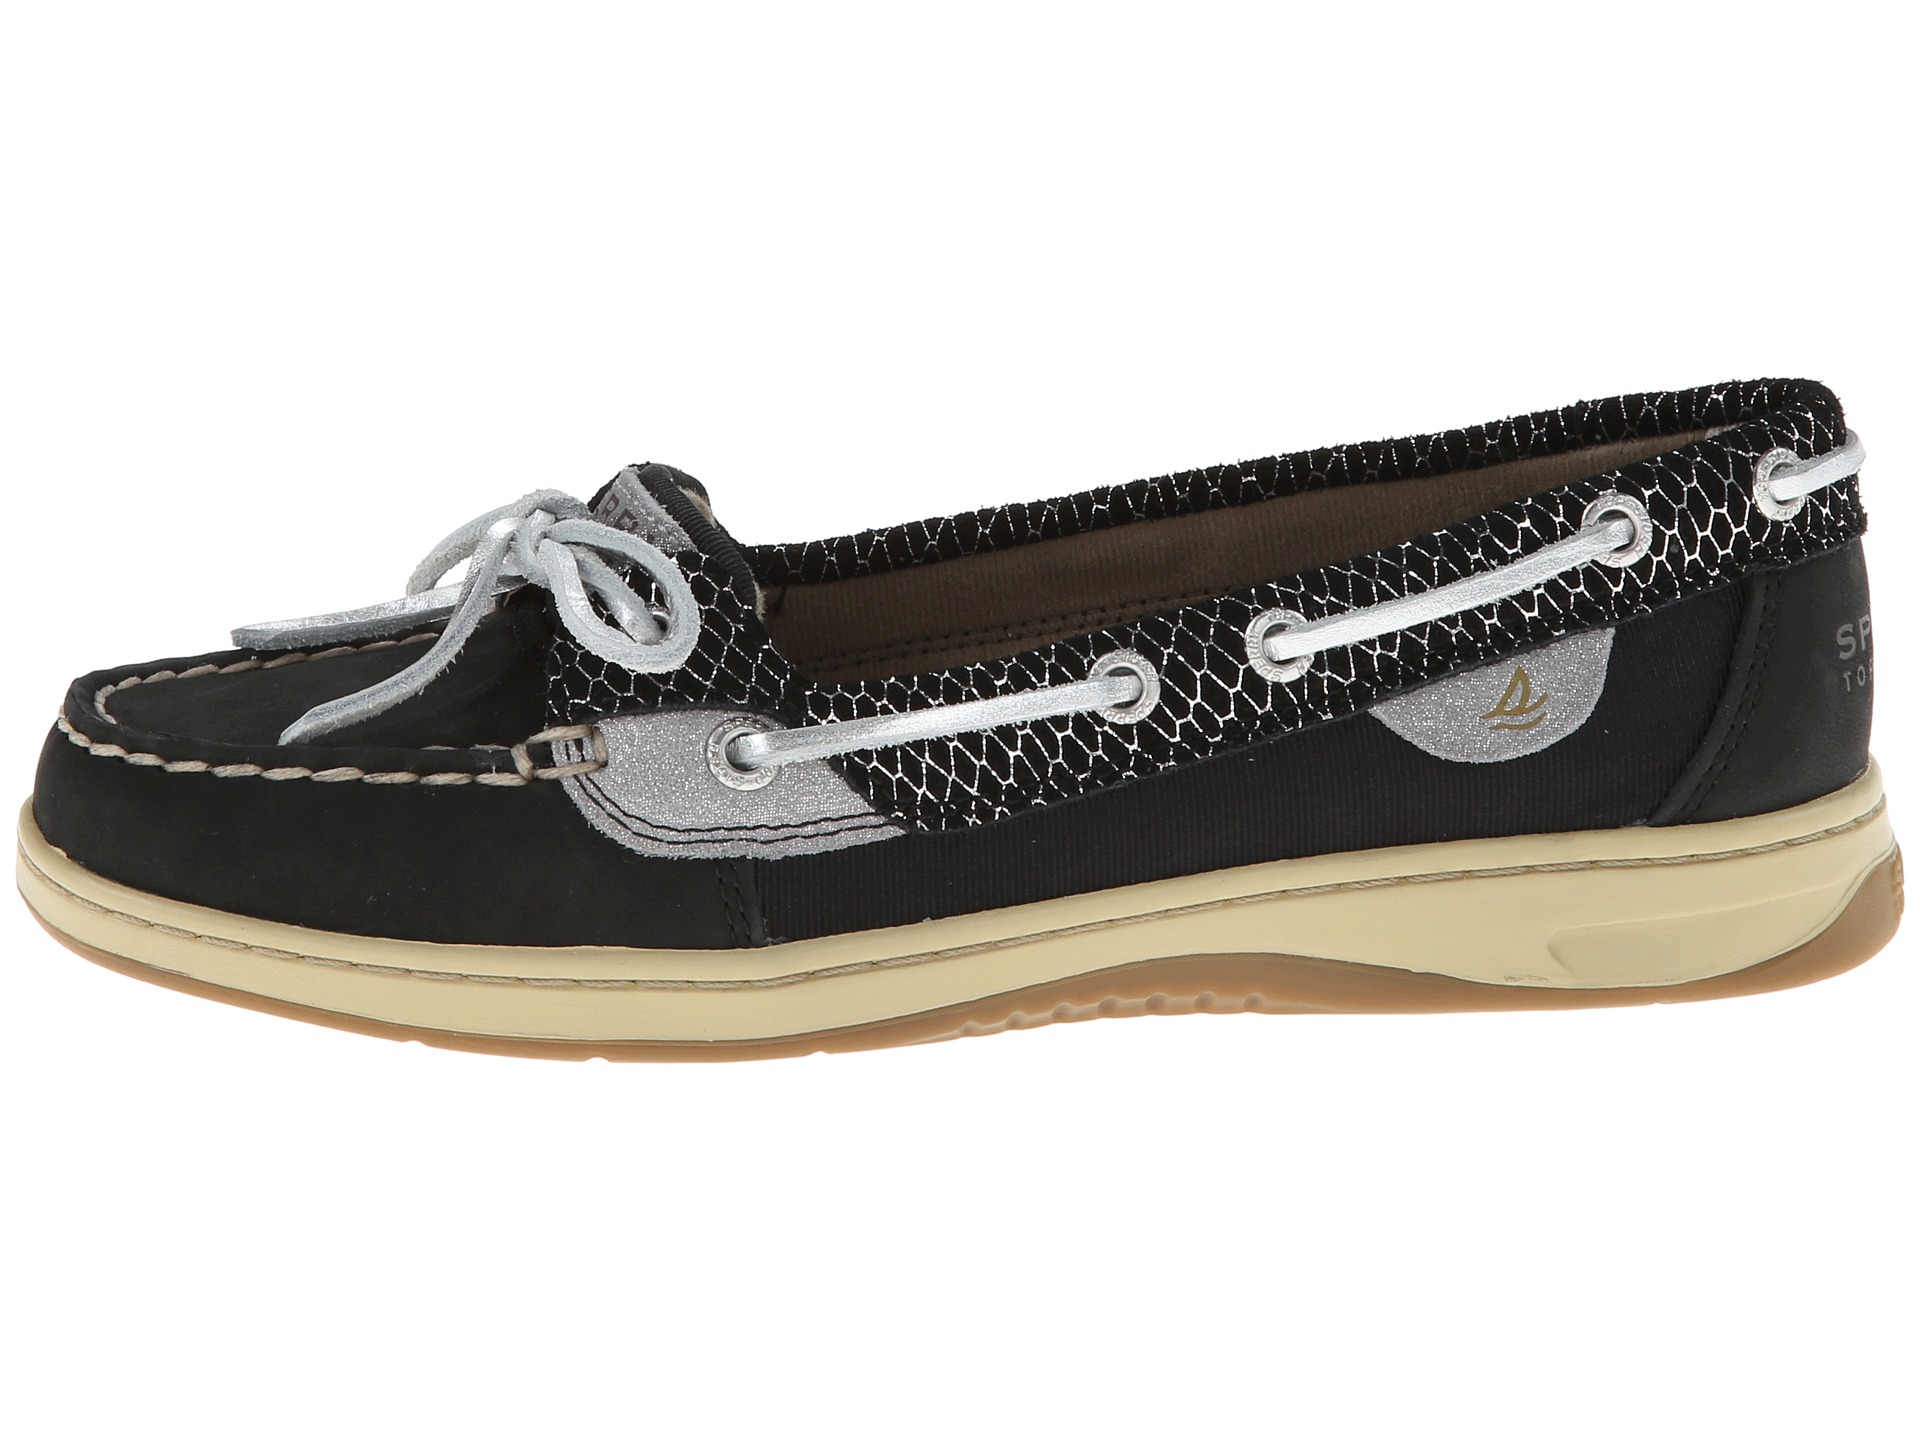 Sperry Top-Sider Angelfish Black Fishscale - Zappos.com Free Shipping ...